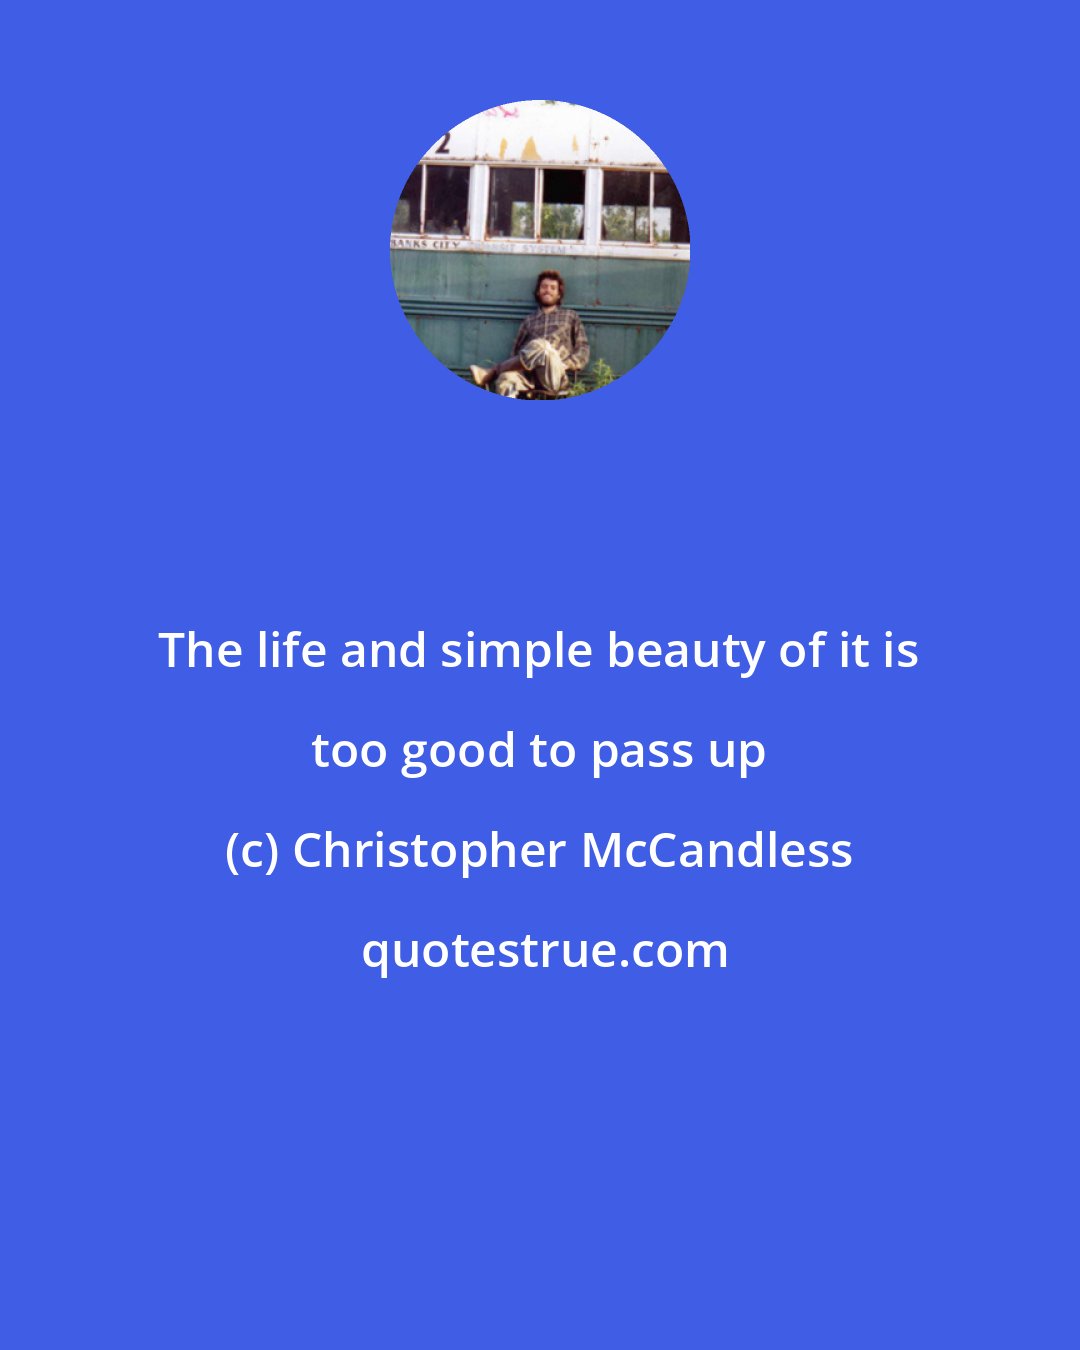 Christopher McCandless: The life and simple beauty of it is too good to pass up